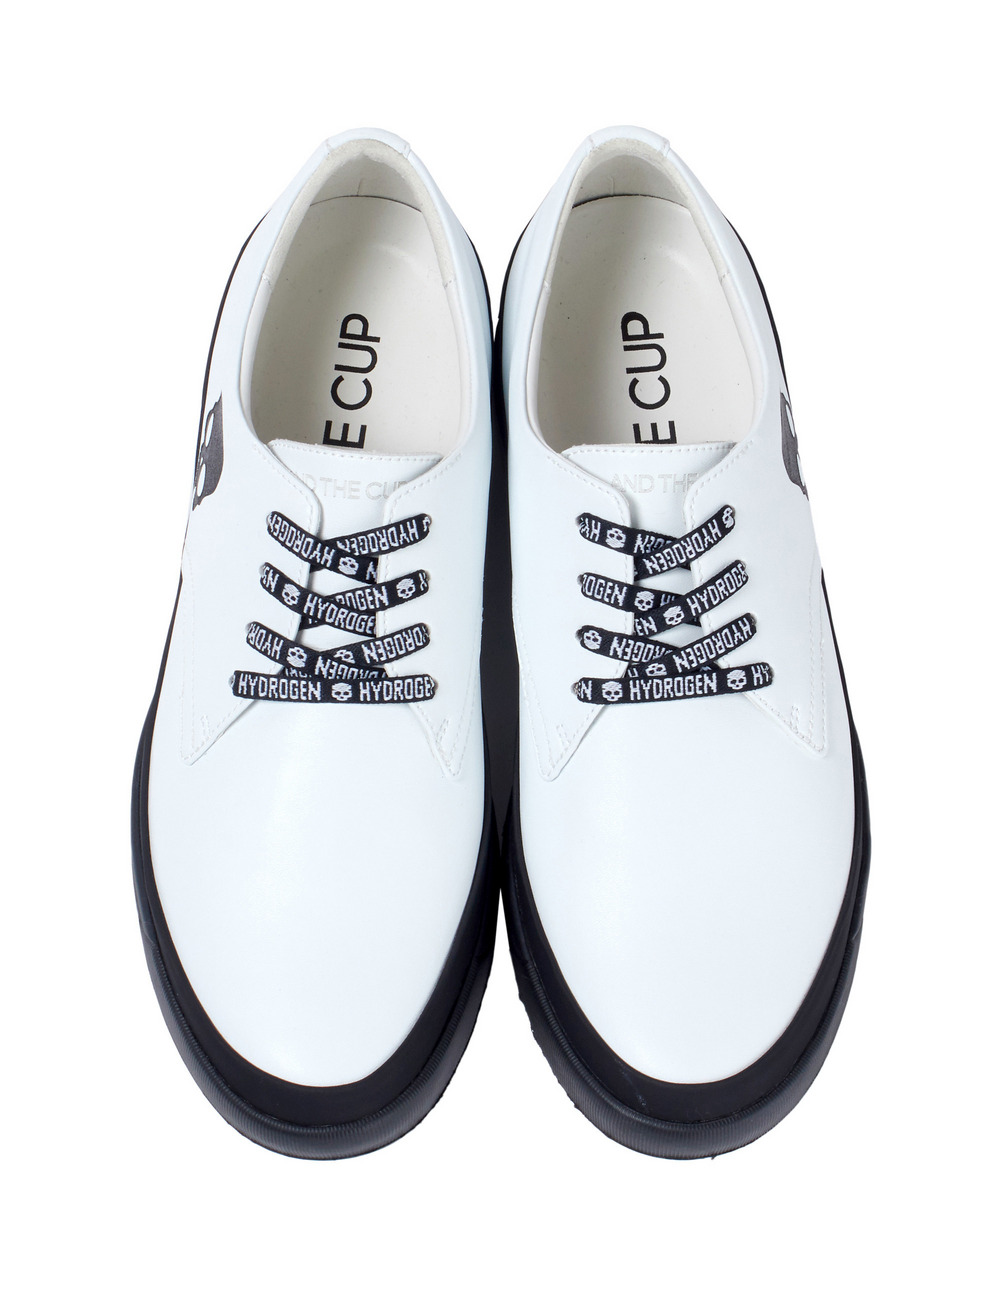 【AND THE CUP by HYDROGEN】ゴルフシューズ(プレーントゥ)/【AND THE CUP by HYDROGEN】GOLF SHOES(PLAIN TOE) 詳細画像 ブラック 4